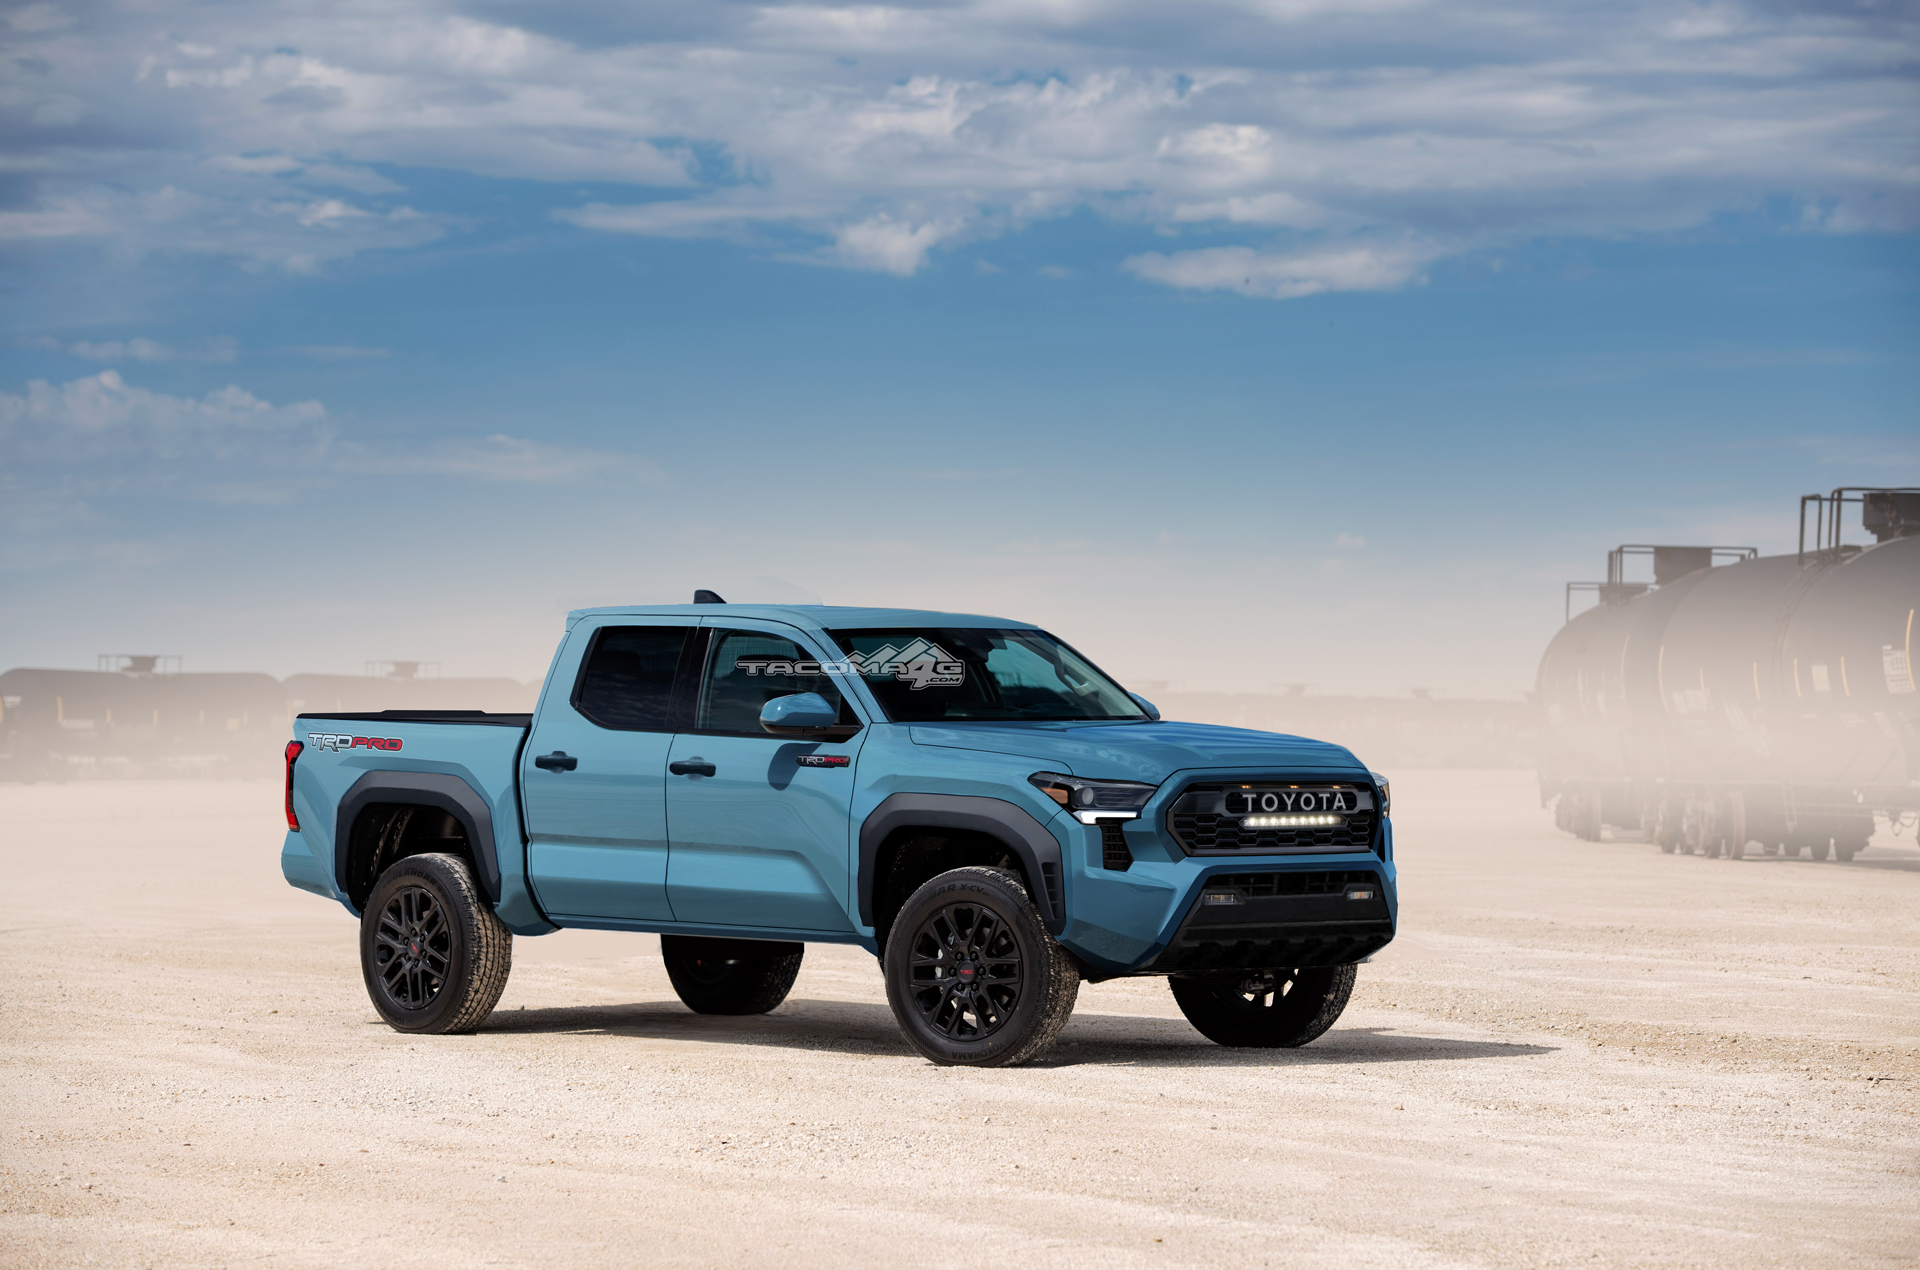 2024 Tacoma Our 2024 Toyota Tacoma TRD PRO Preview Renderings! Tacoma-2023-front-Blue